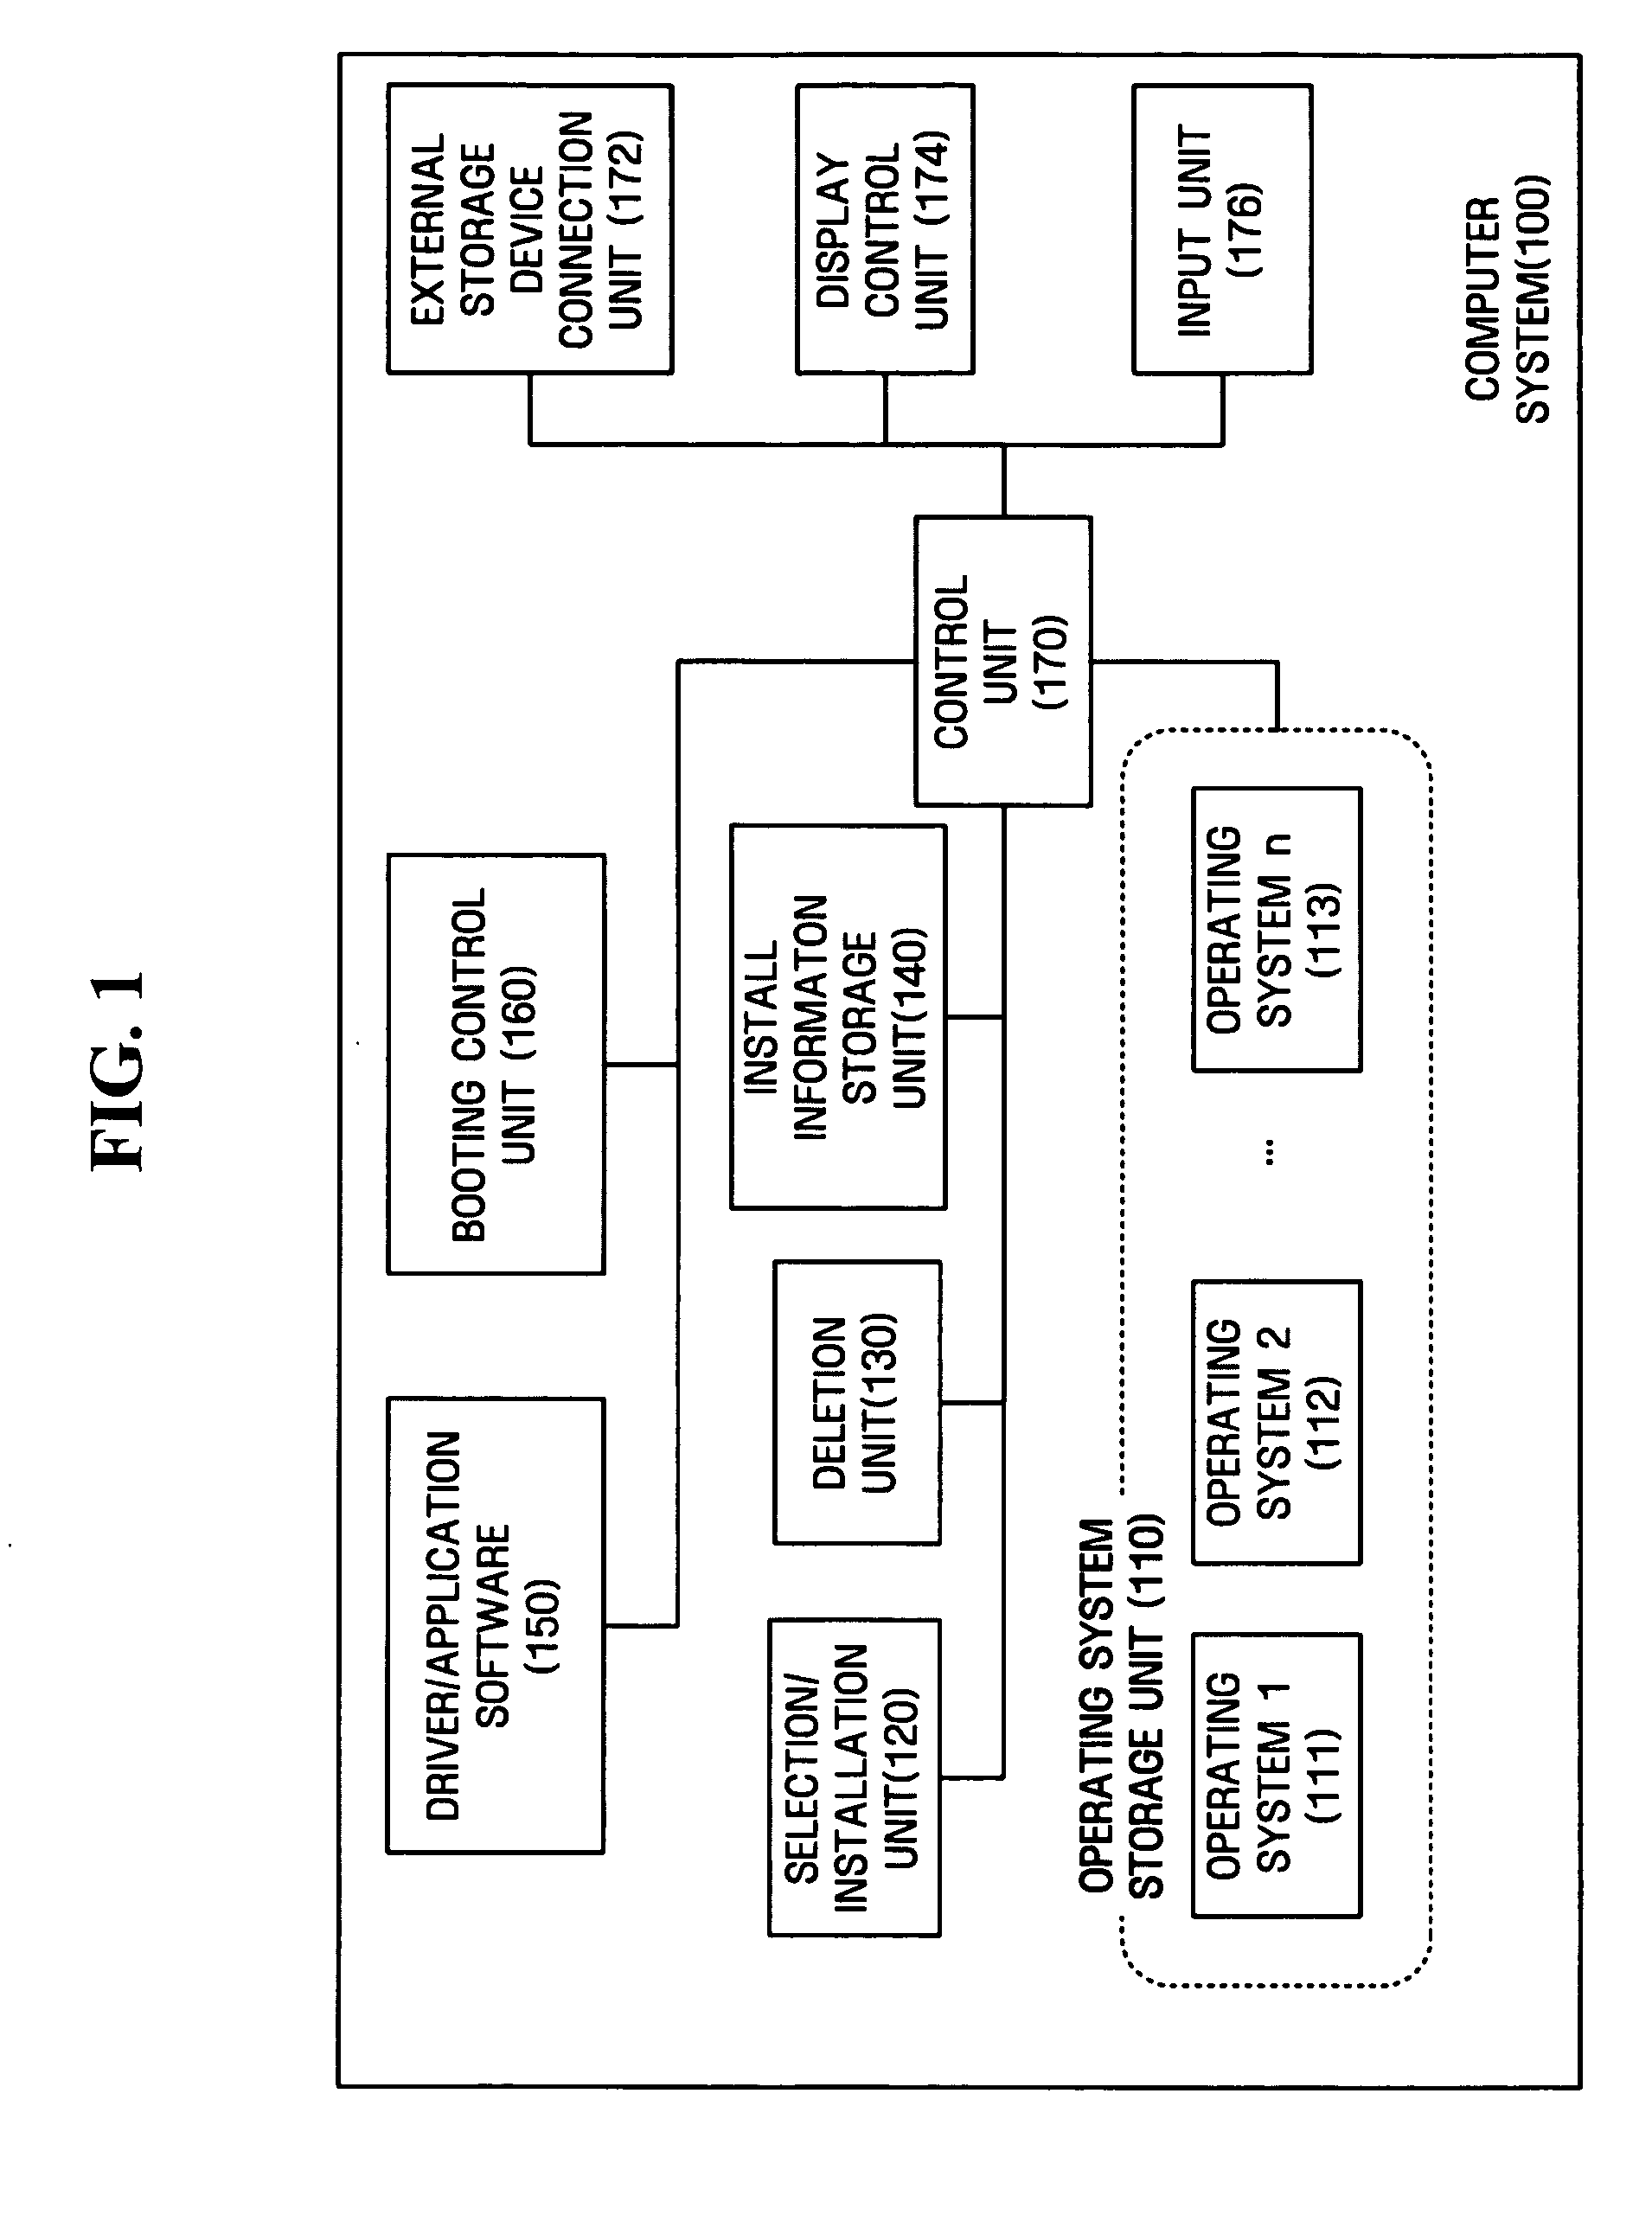 Computer system and method for selectively installing one operating system among a plurality of operating systems